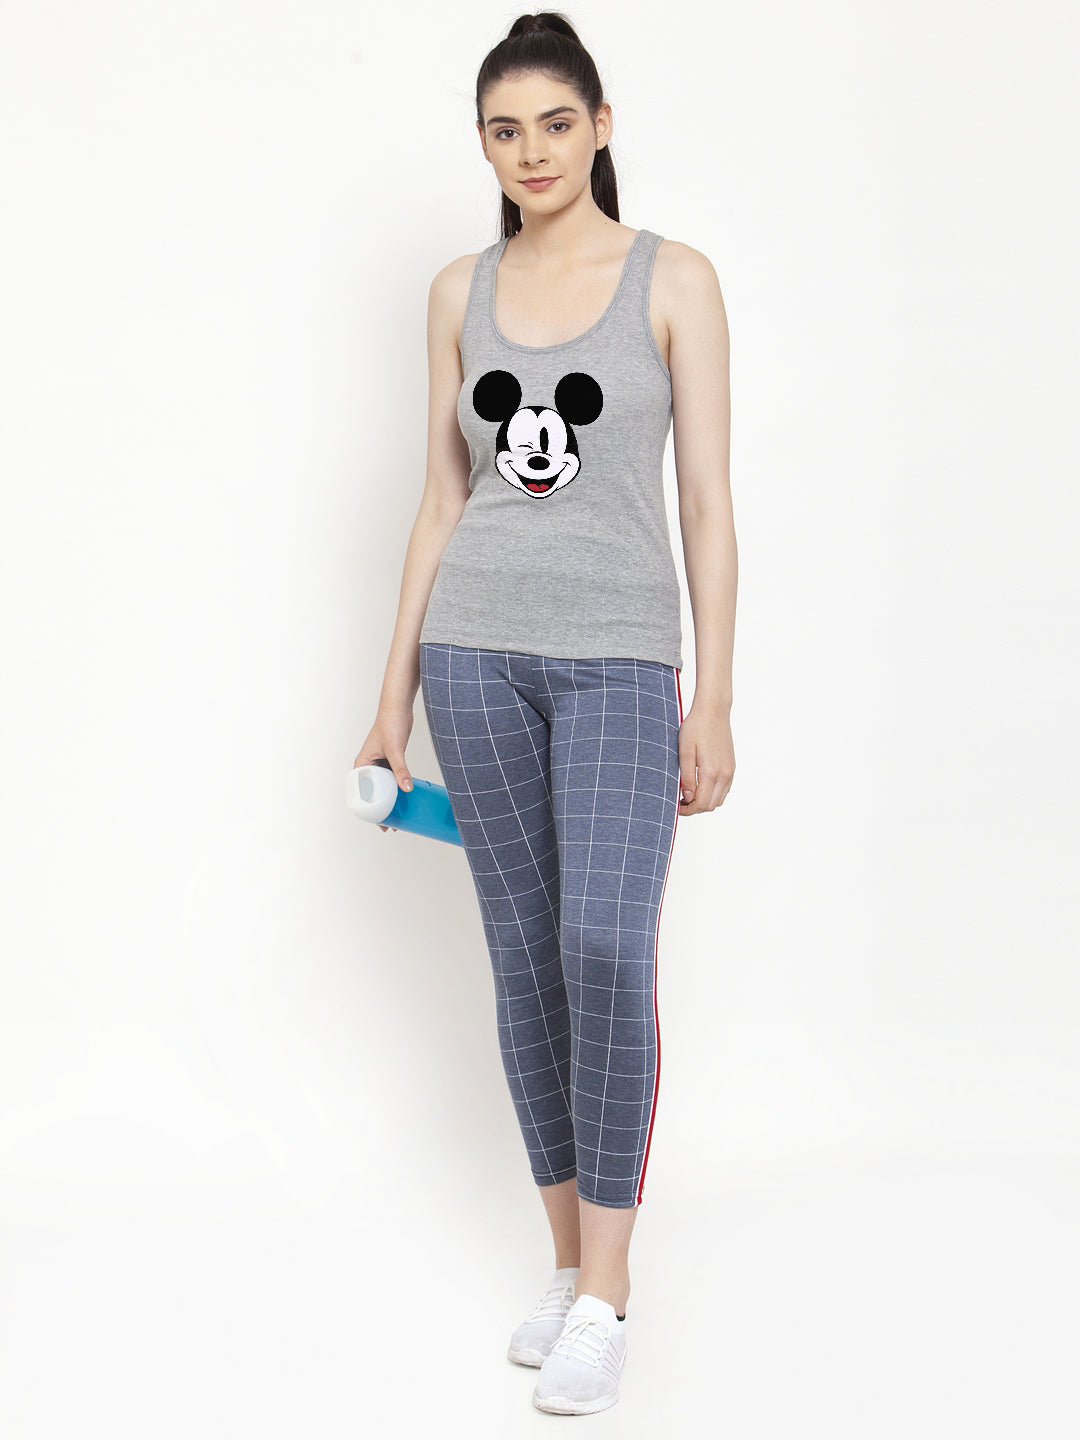 Micky Mouse Printed Women Tank Top/Vest - Friskers